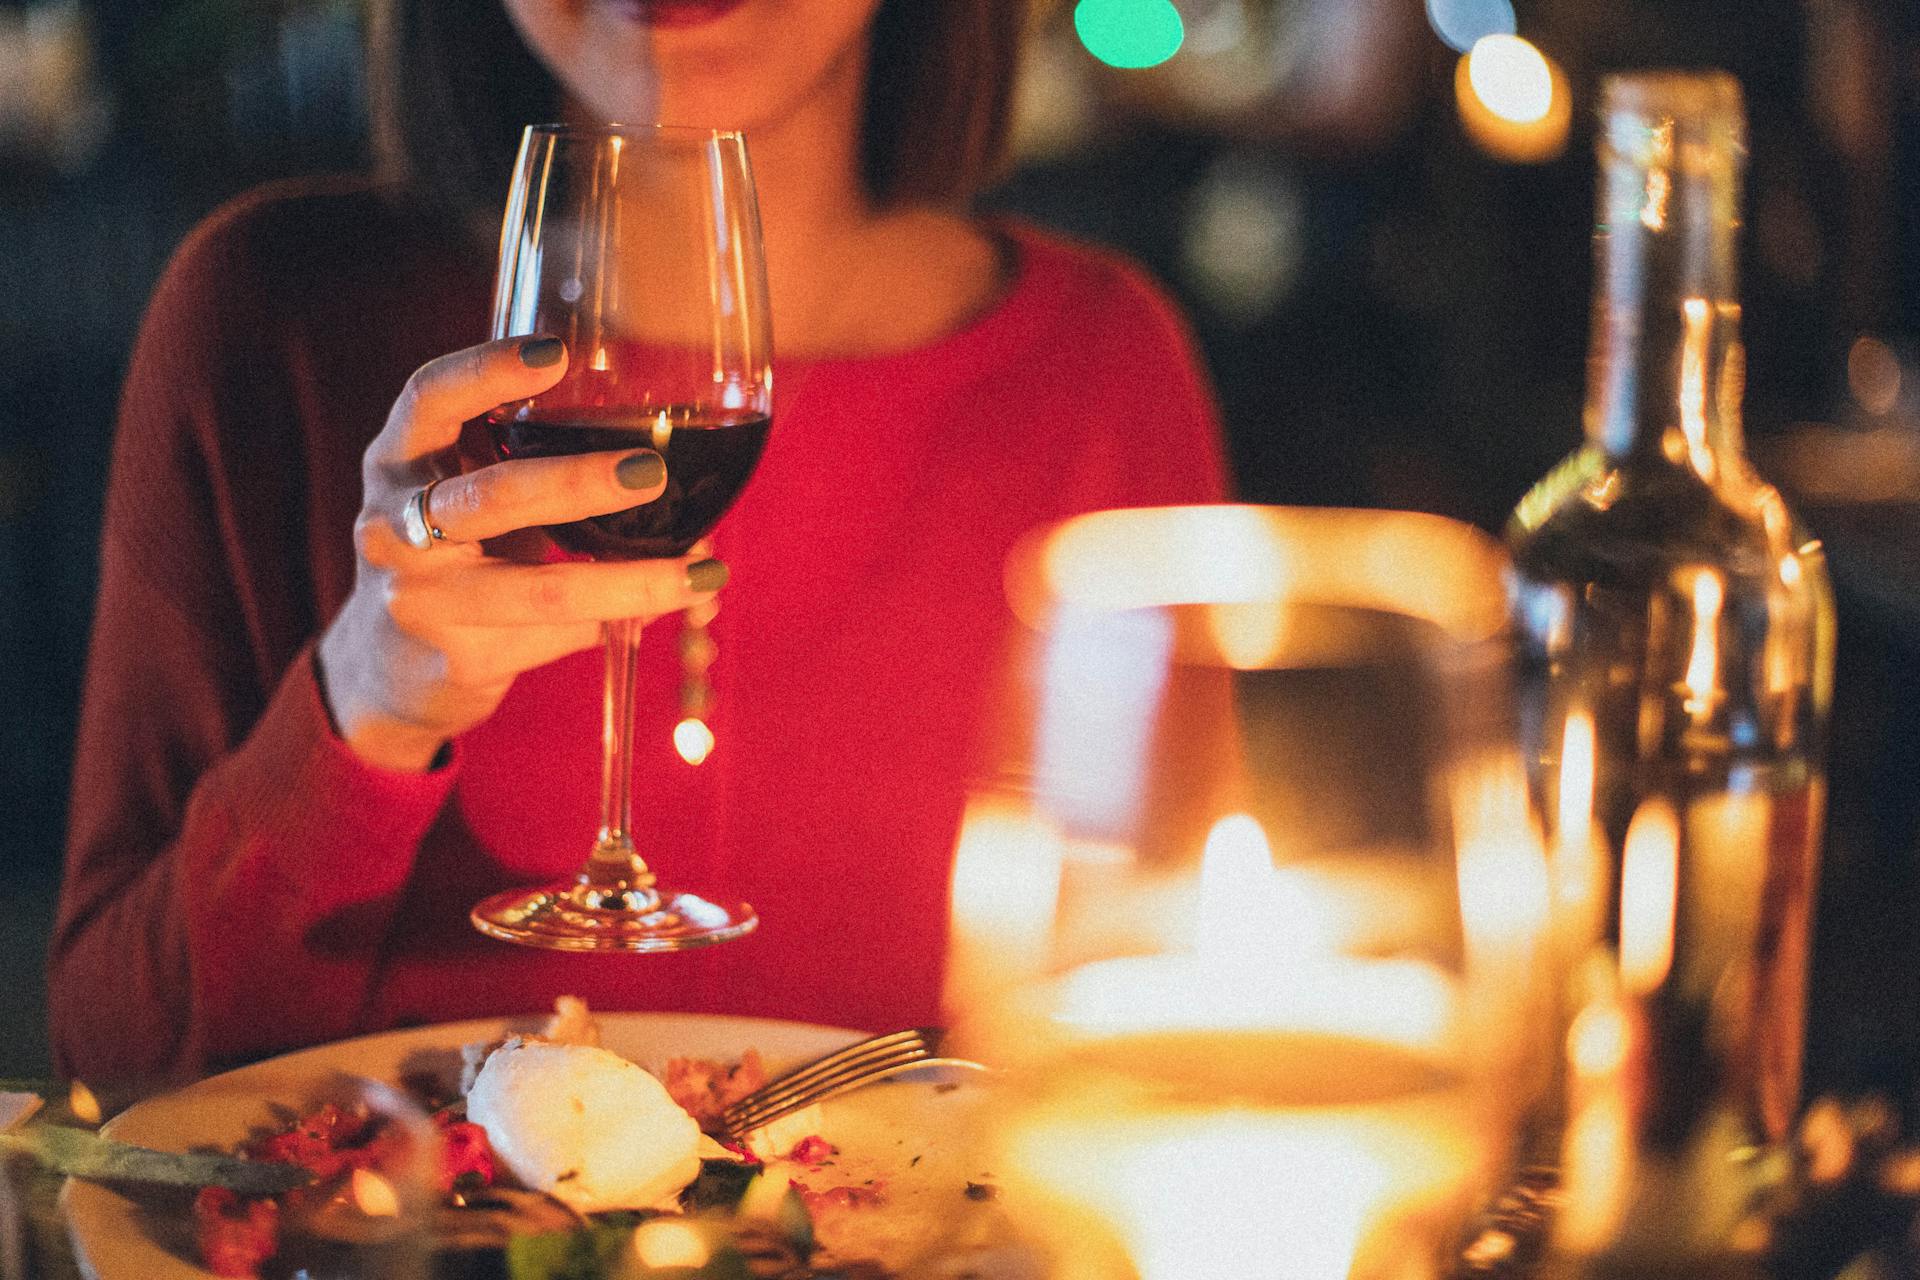 A close-up shot of a woman holding a glass of wine during dinner | Source: Pexels